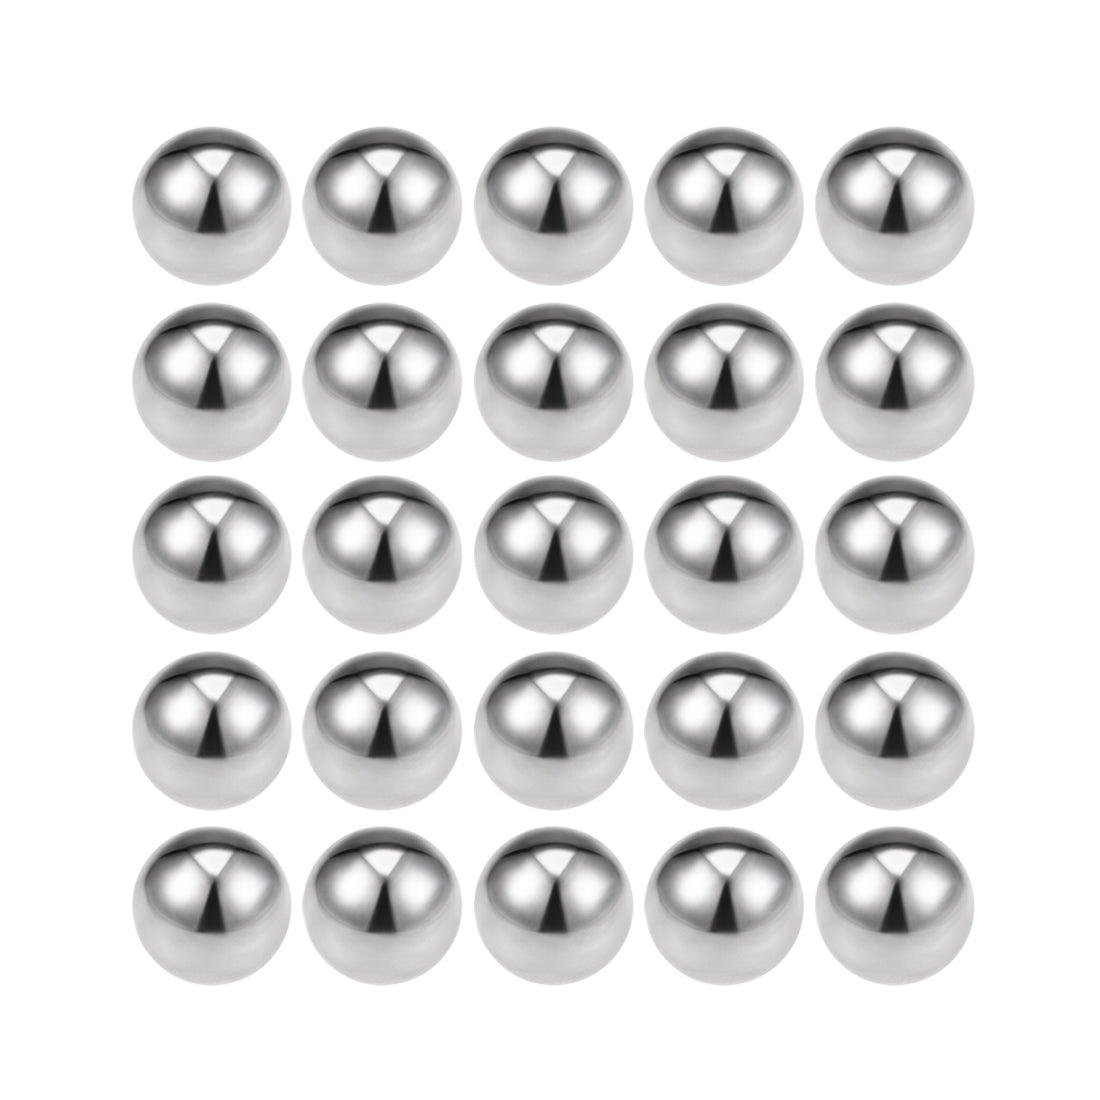 Uxcell Uxcell 3/8" Bearing Balls 440C Stainless Steel G25 Precision Balls 25pcs